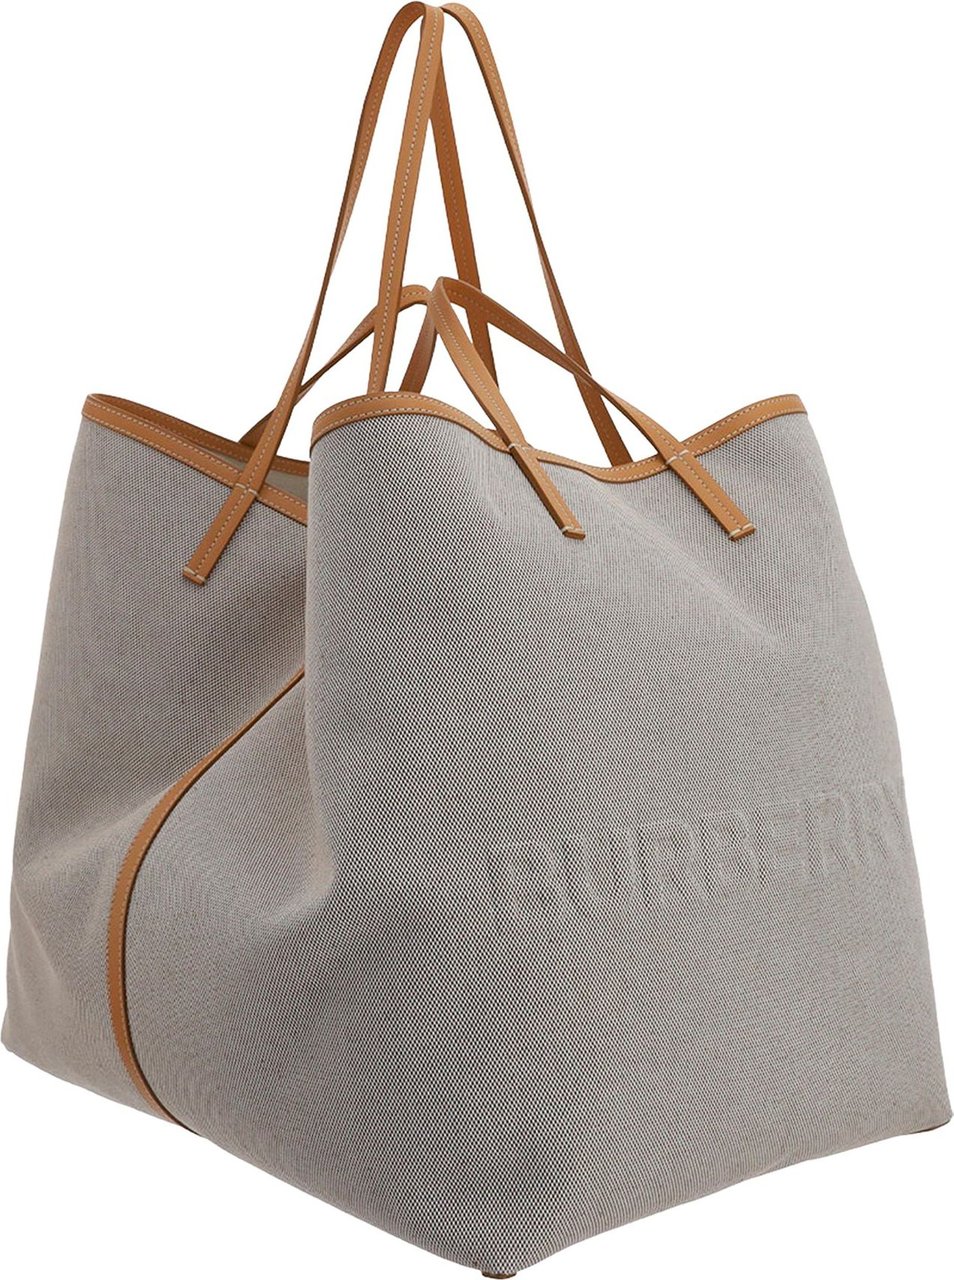 Burberry Burberry Canvas Tote Bag Beige